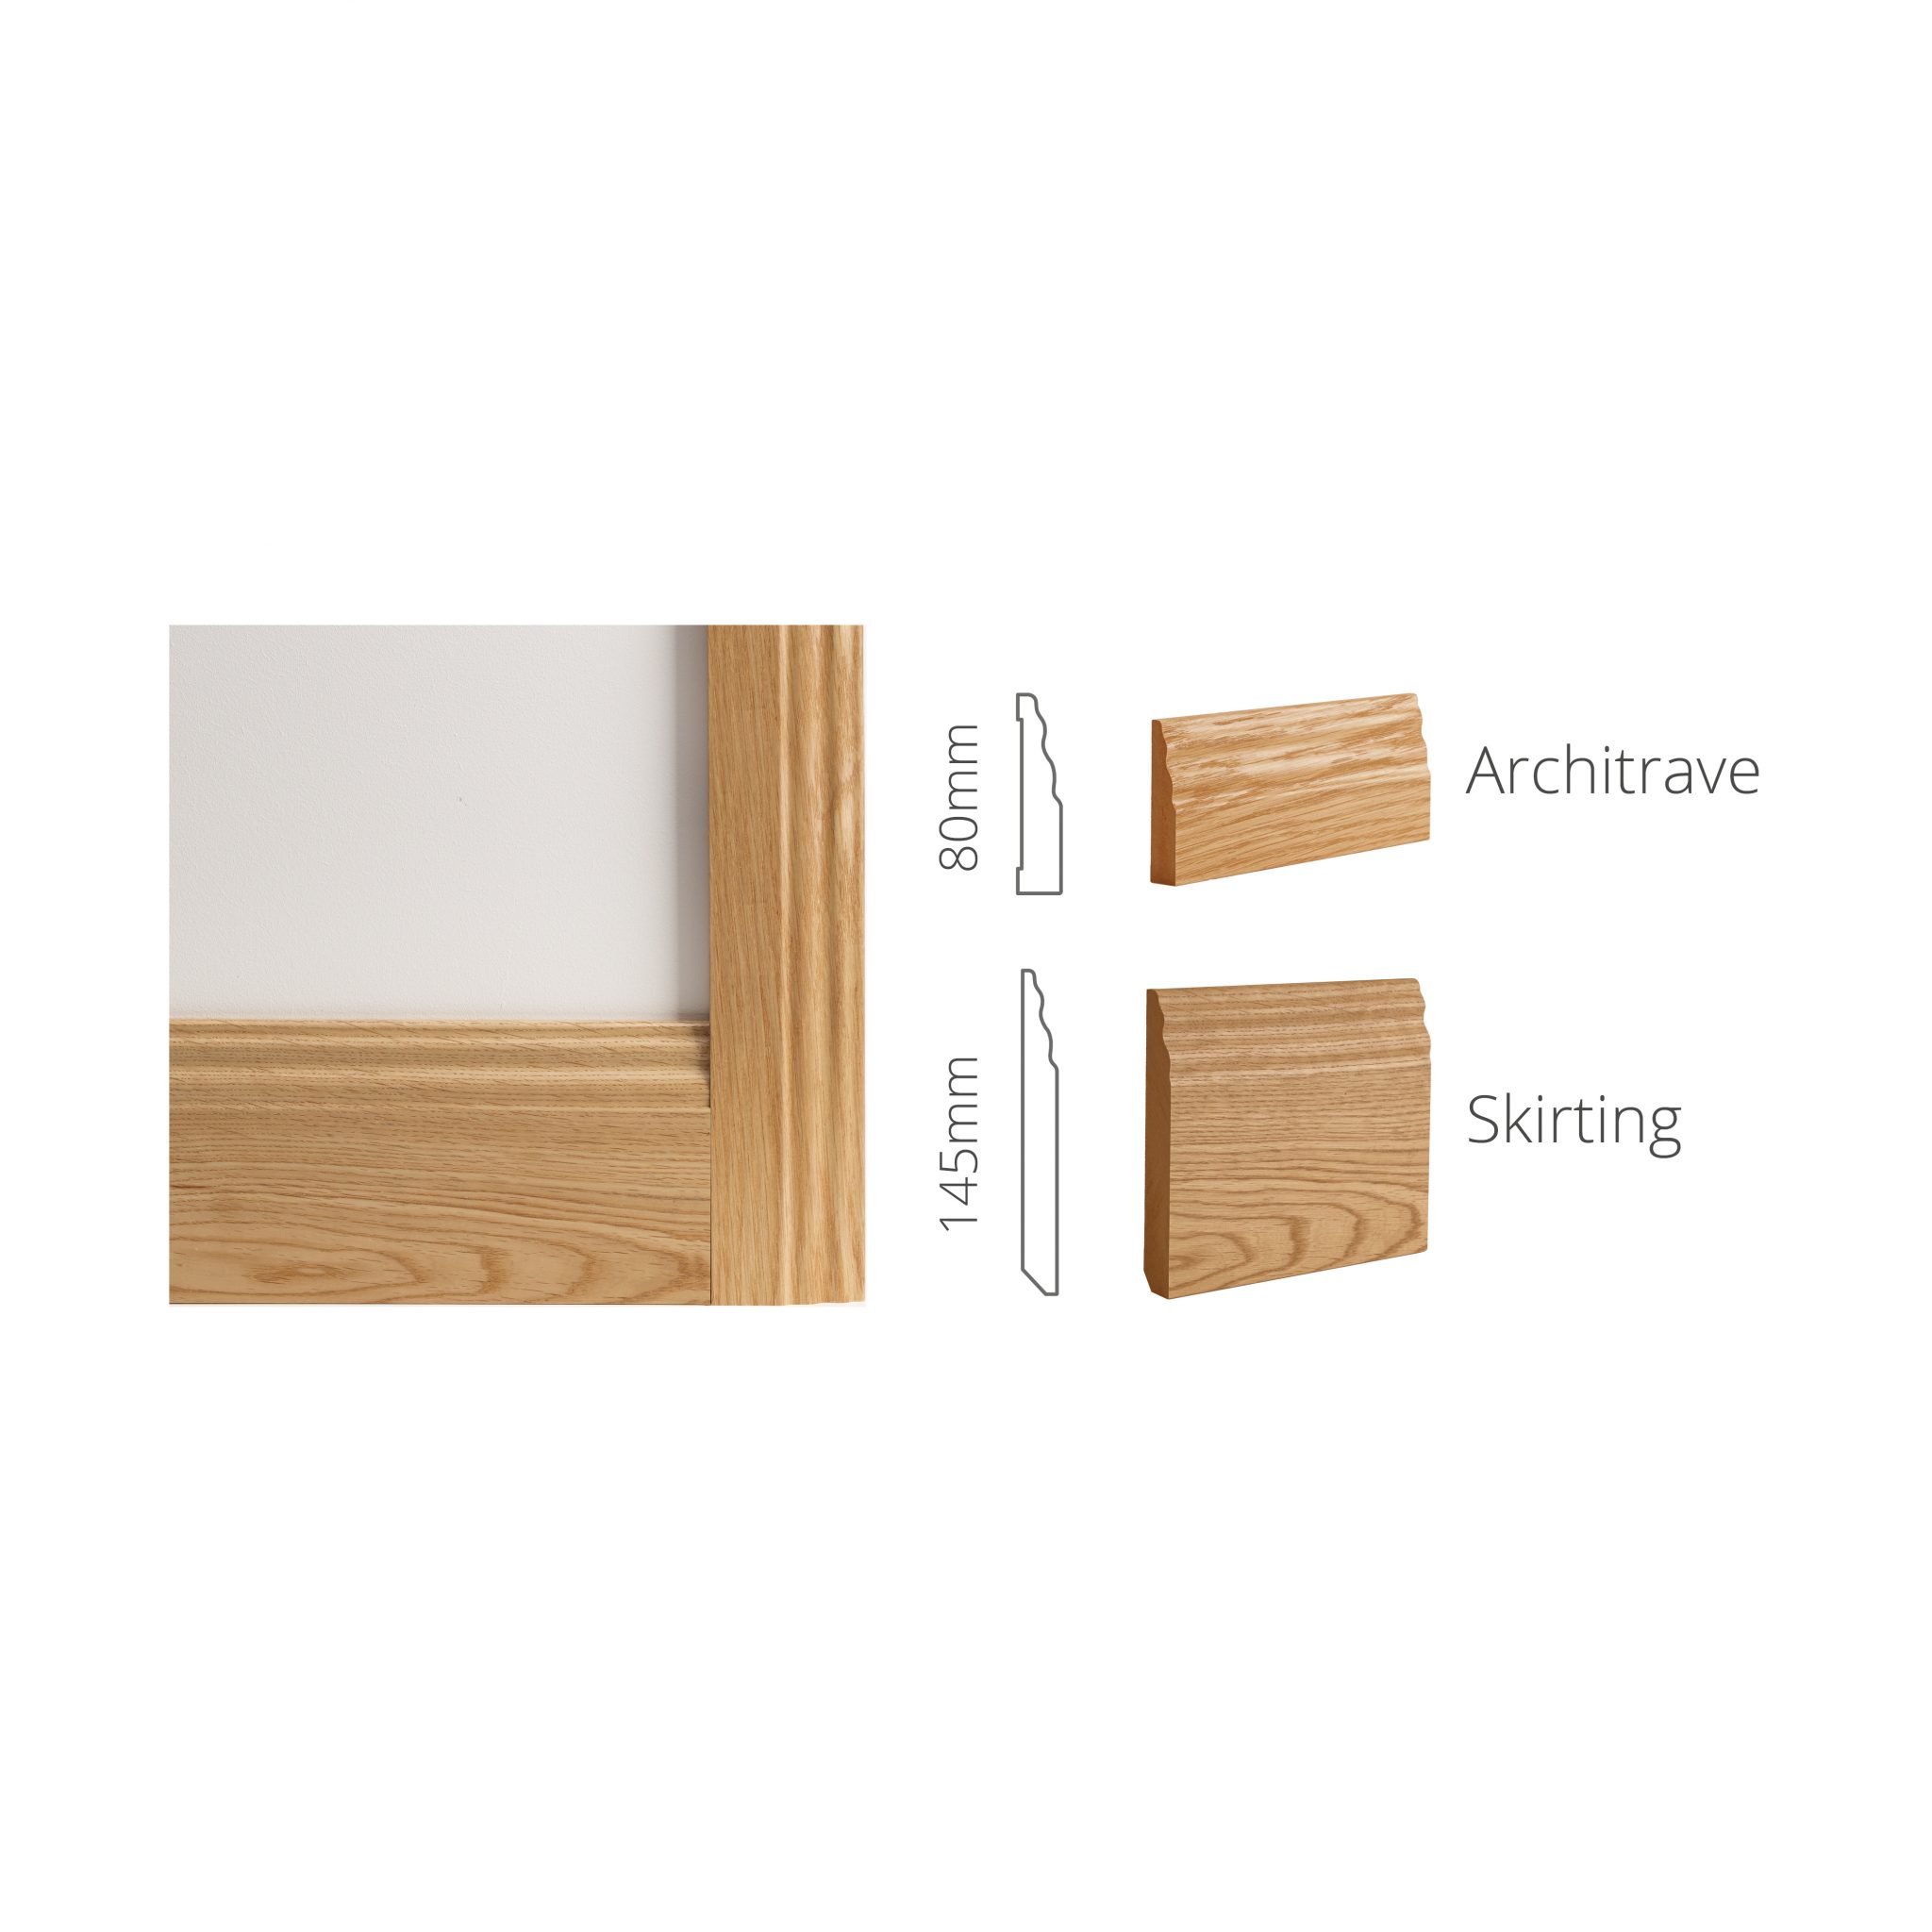 Traditional-Oak-Skirting-and-Architrave-with-dimensions-scaled